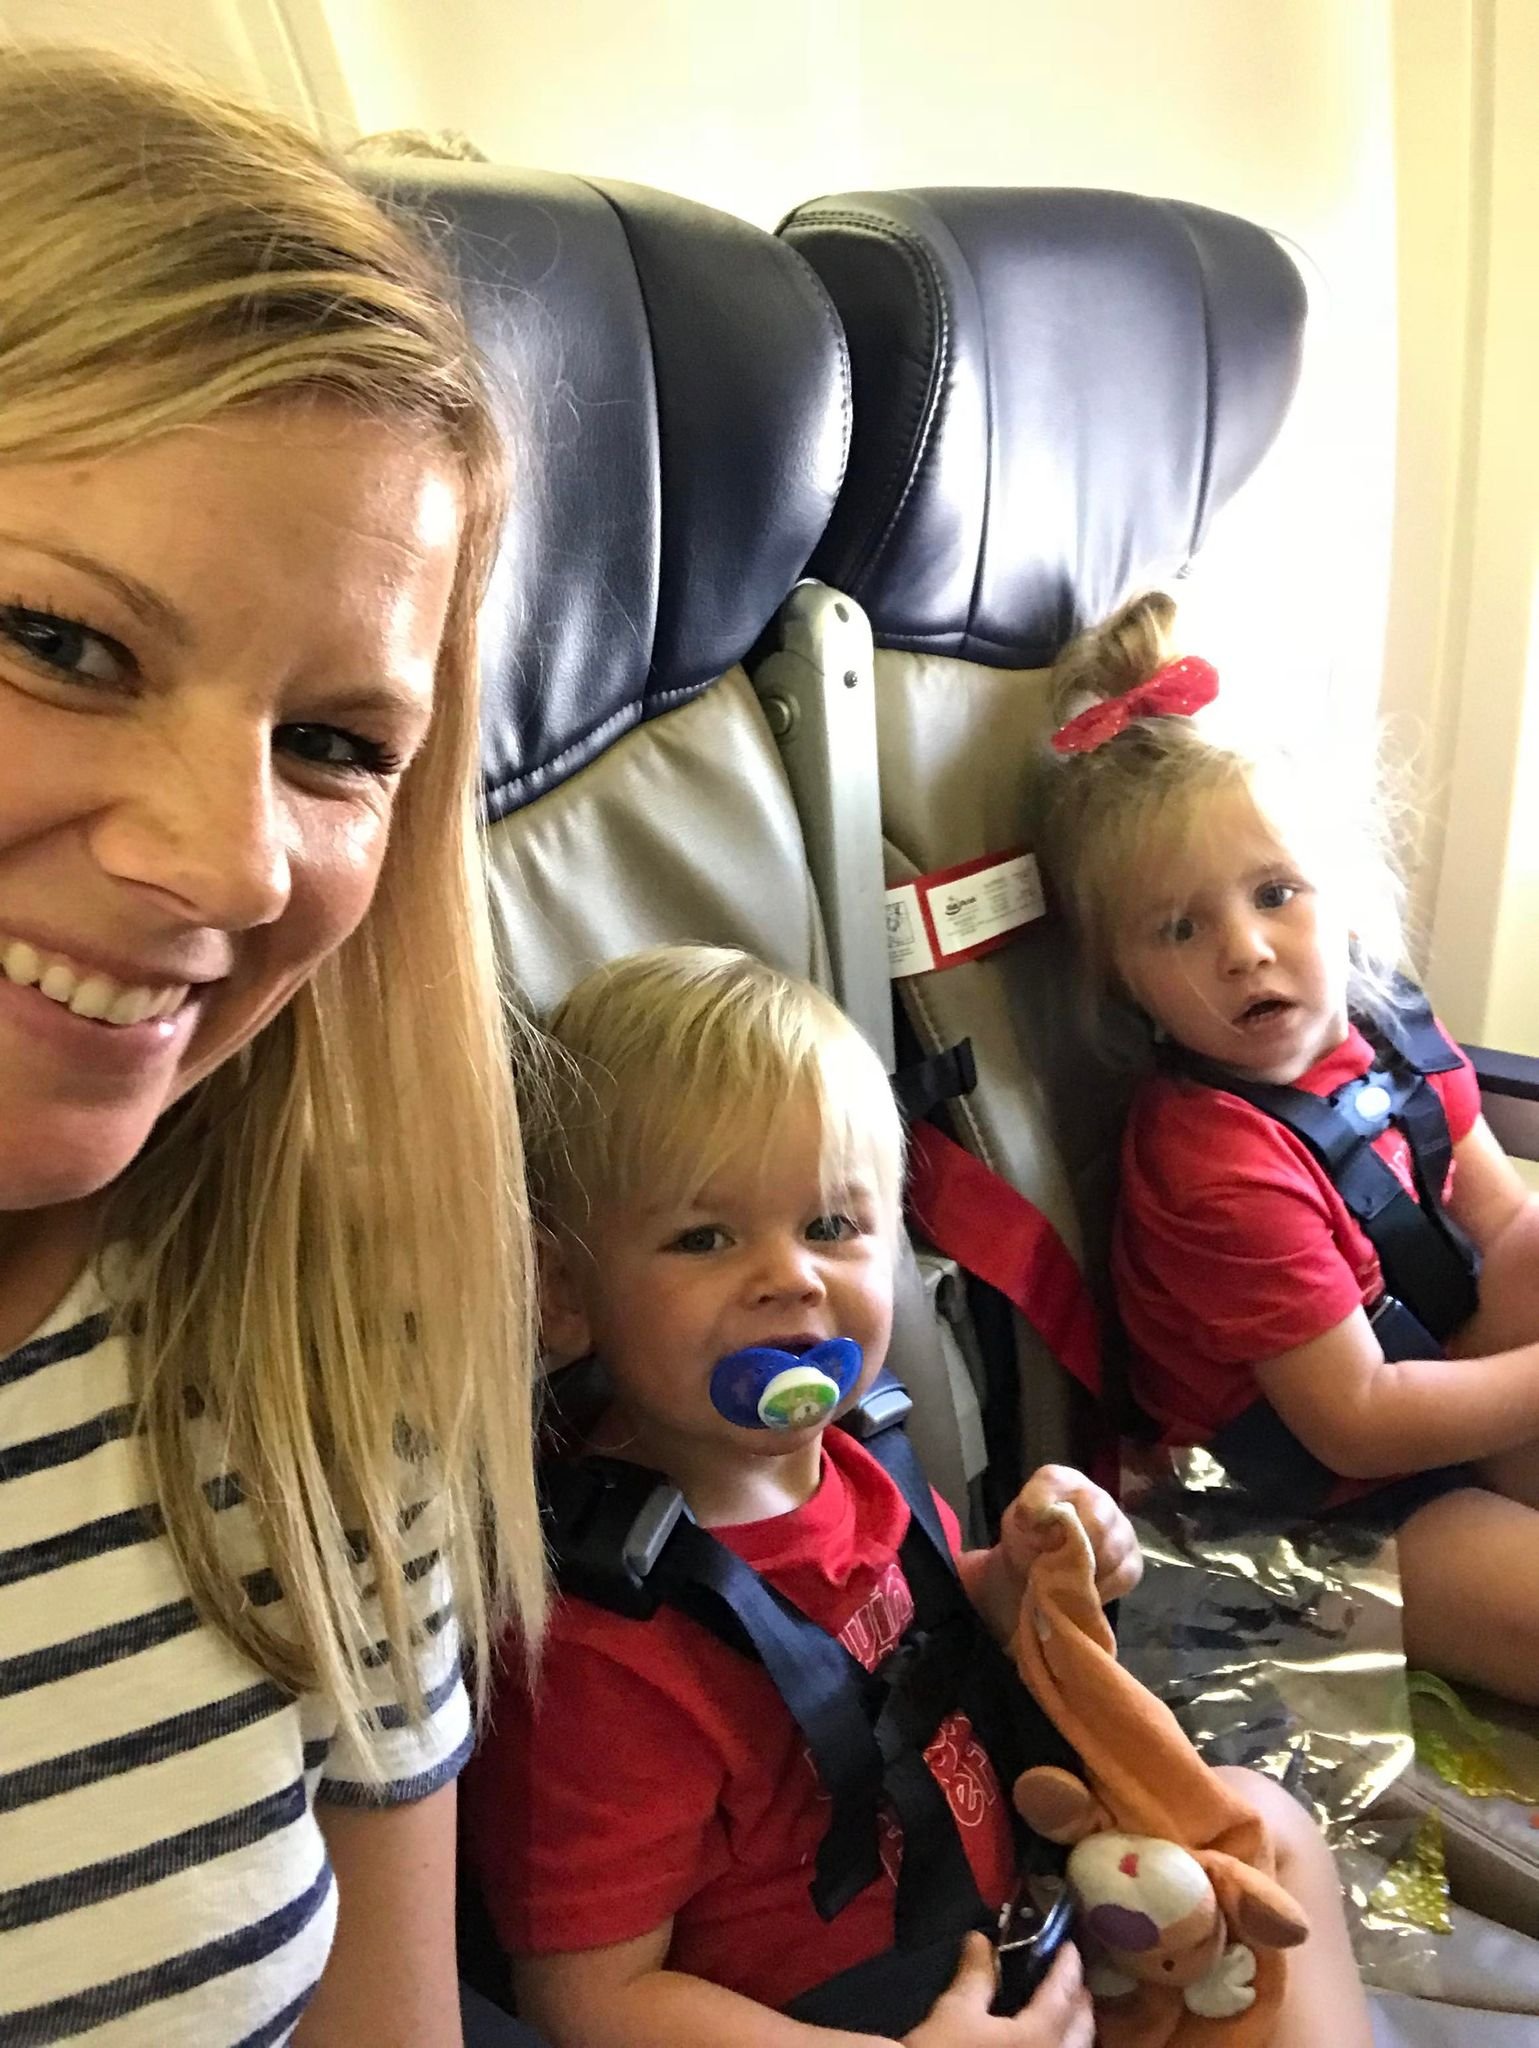 Airplane Activities for a One Year Old - Tales of a Teacher Mom  Airplane  activities, Toddler airplane activities, Traveling with baby